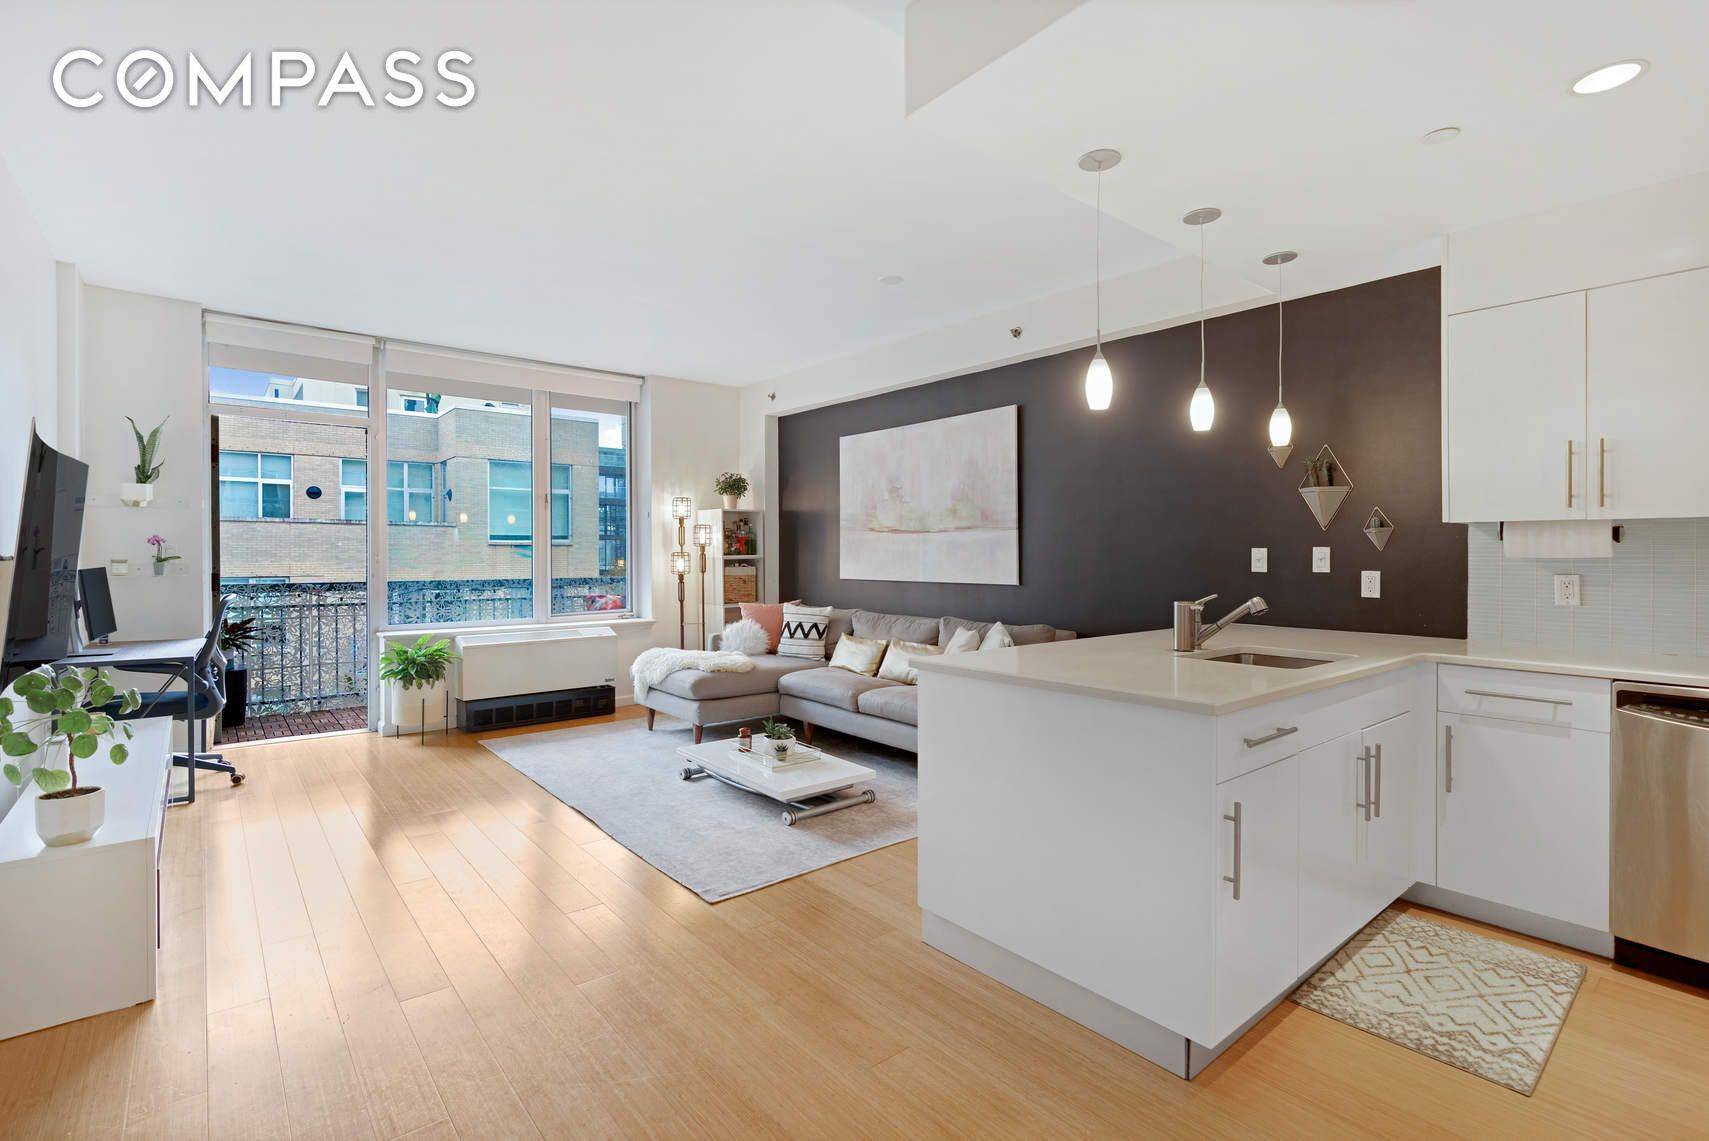 Beautiful, bright and spacious home with a chefs kitchen, in unit washer dryer and a large private balcony just moments away from the Williamsburg waterfront.